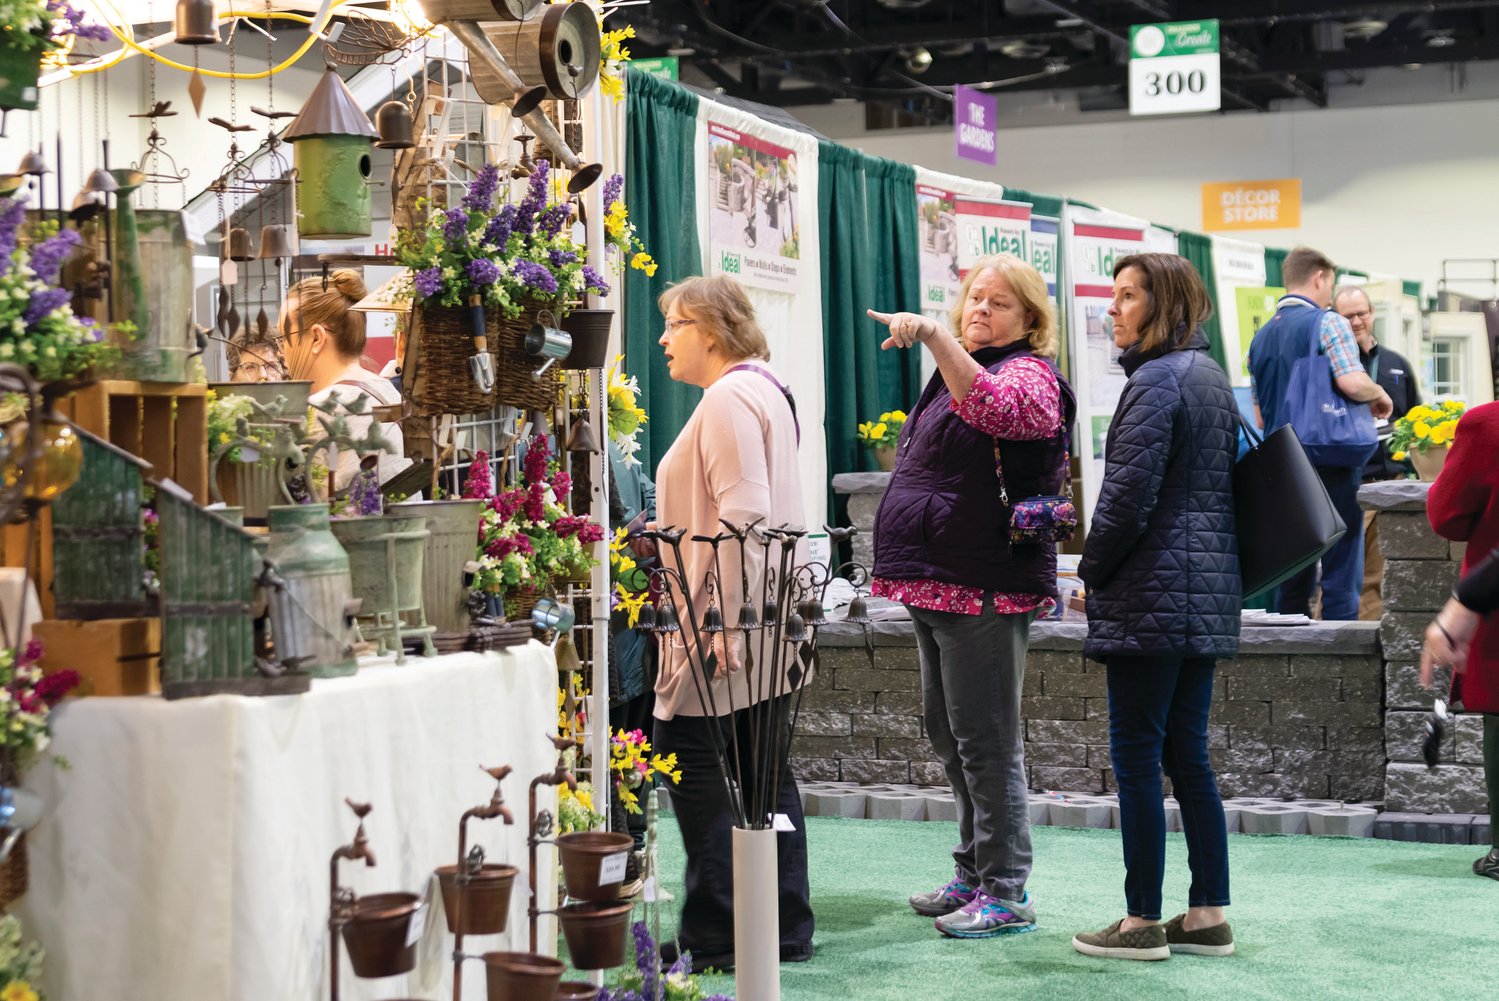 LEARNING FROM EXPERTS: The RI Home Show features hundreds of individual exhibitors, contractors, workshops and more.